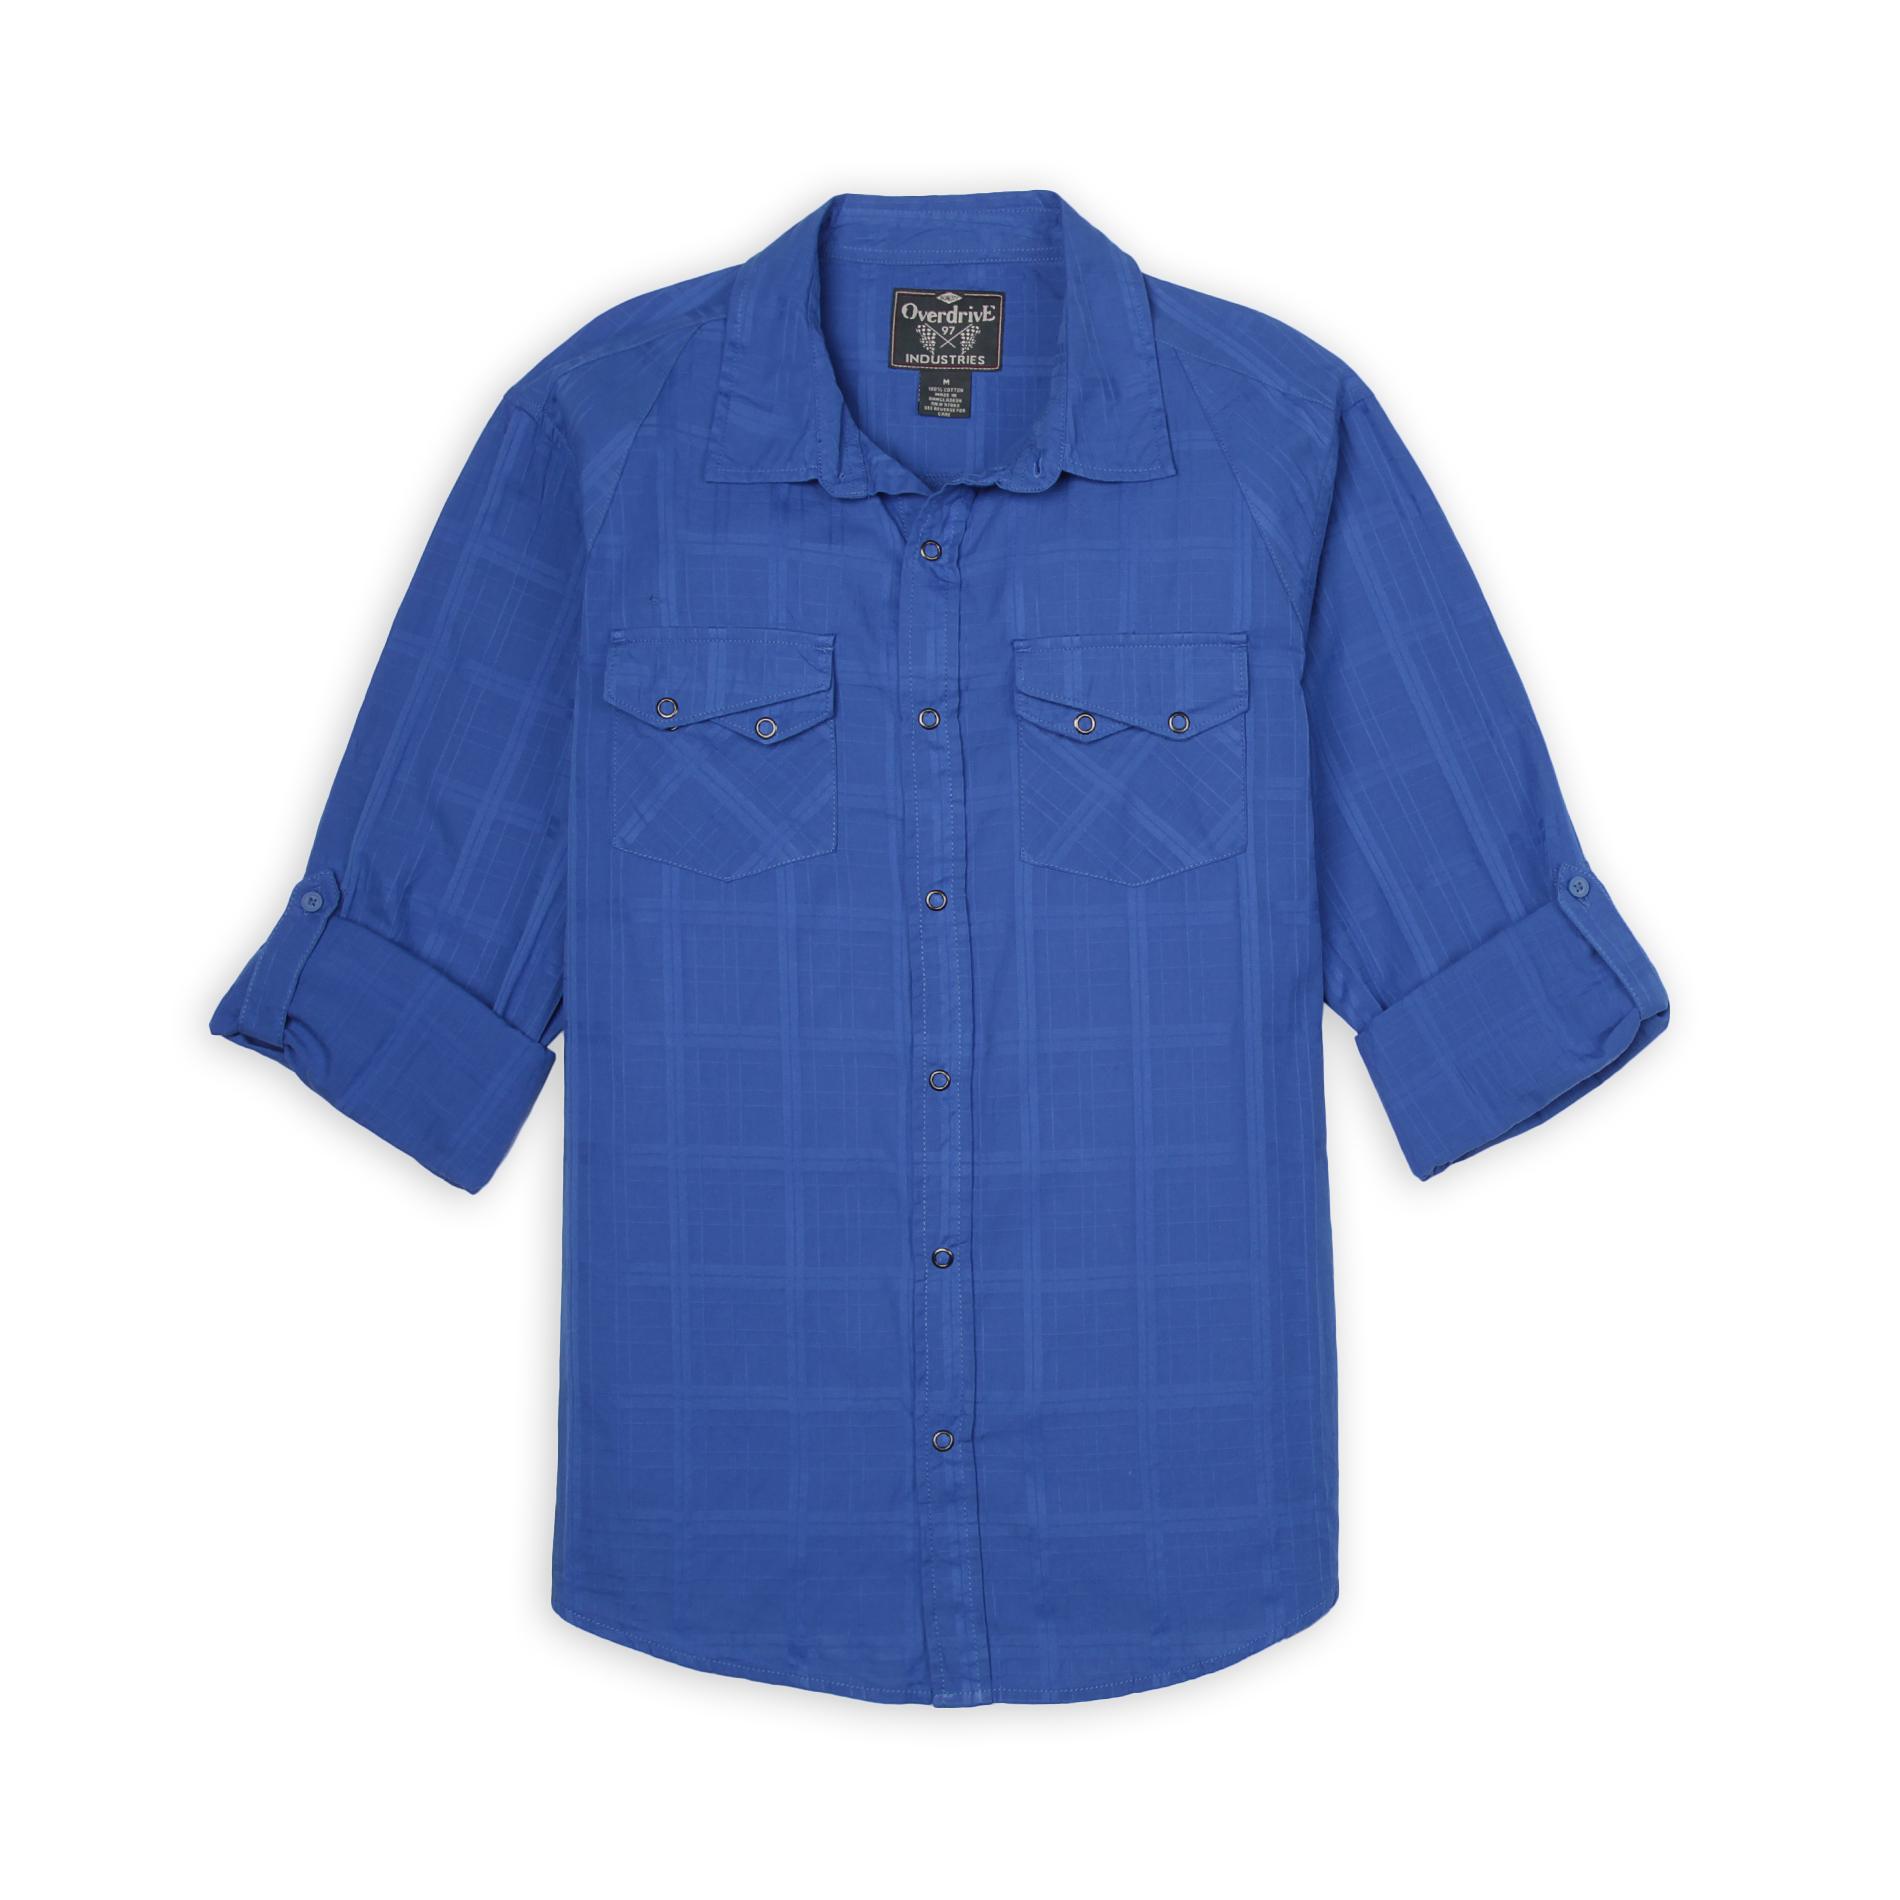 Overdrive Young Men's Woven Shirt - Dobby Check